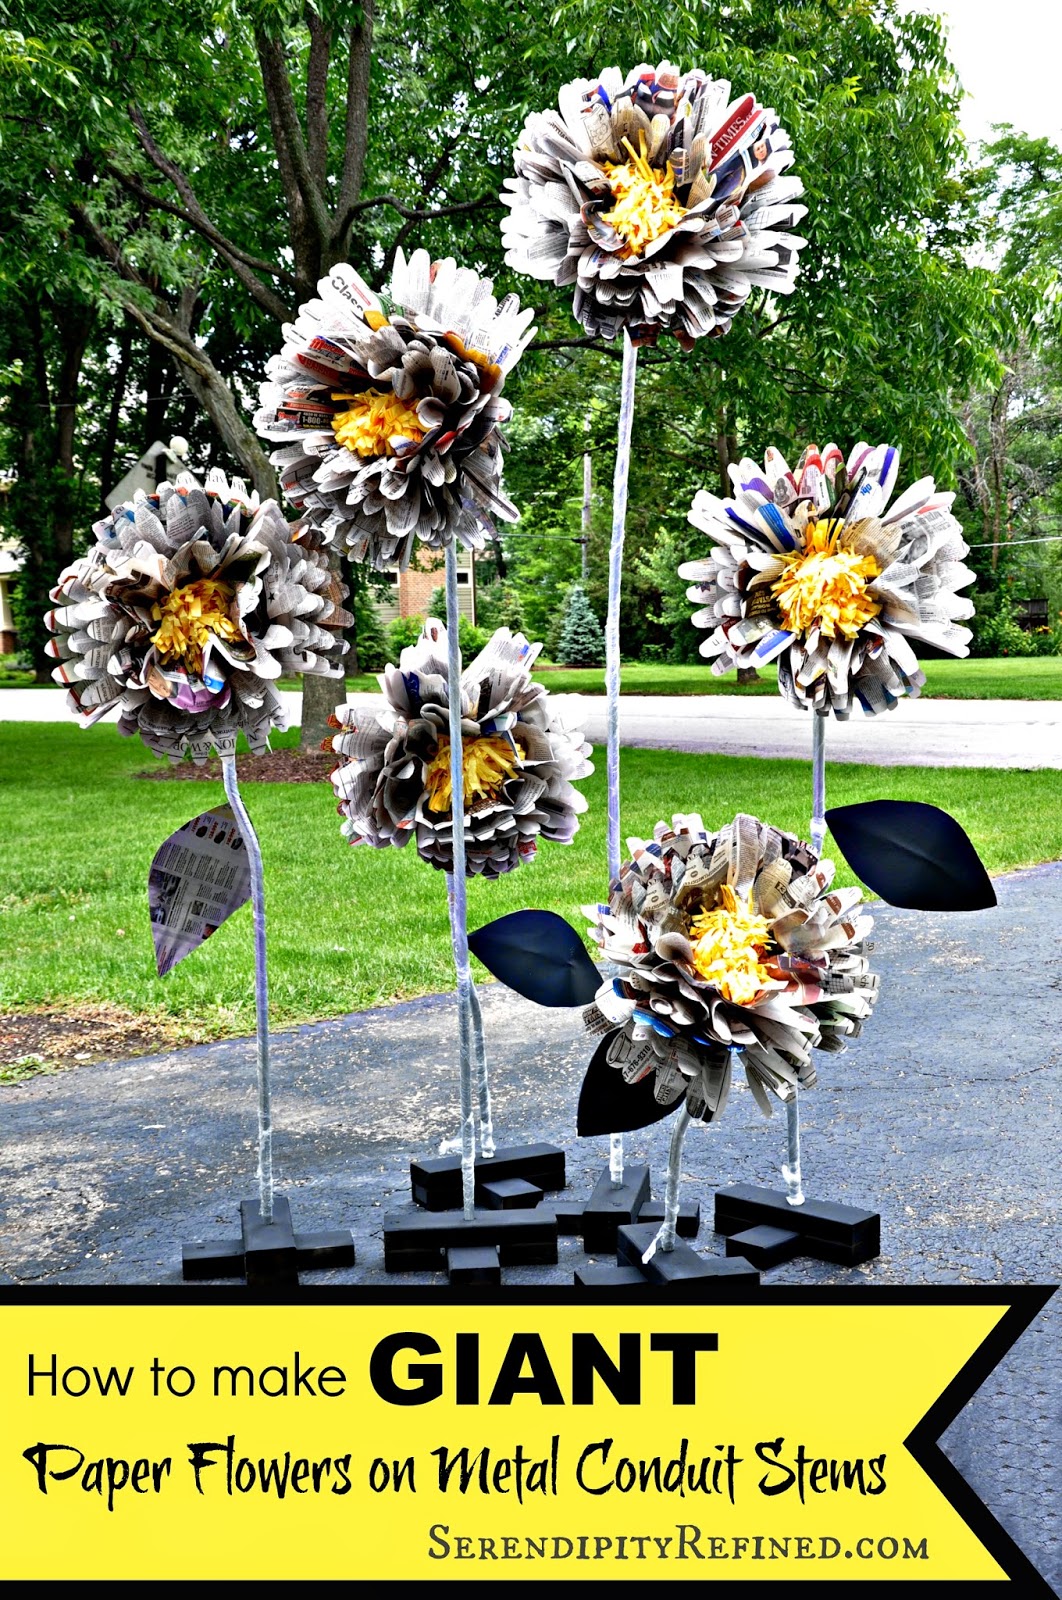 Giant Free Standing Paper Flowers on Conduit Stems Tutorial